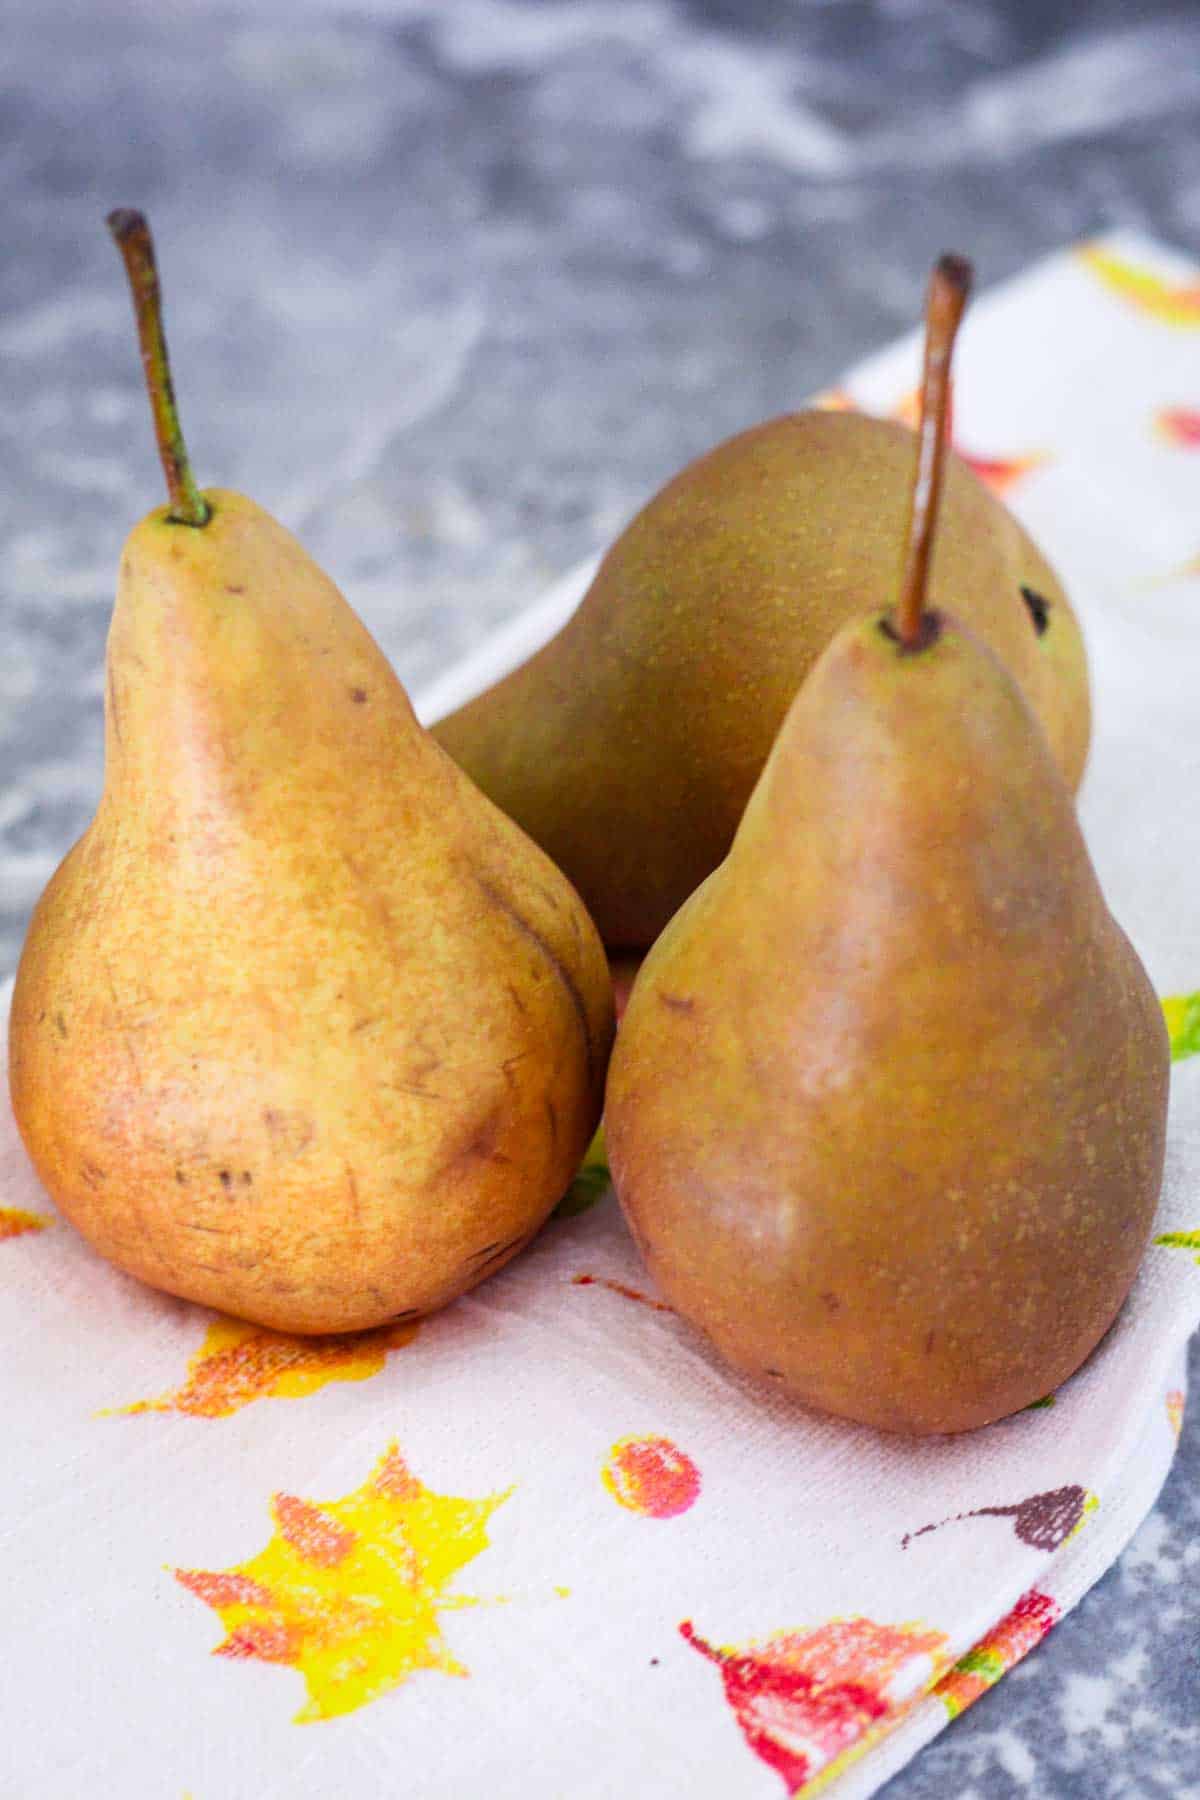 Bosc pears on a counter with a kitchen towel.